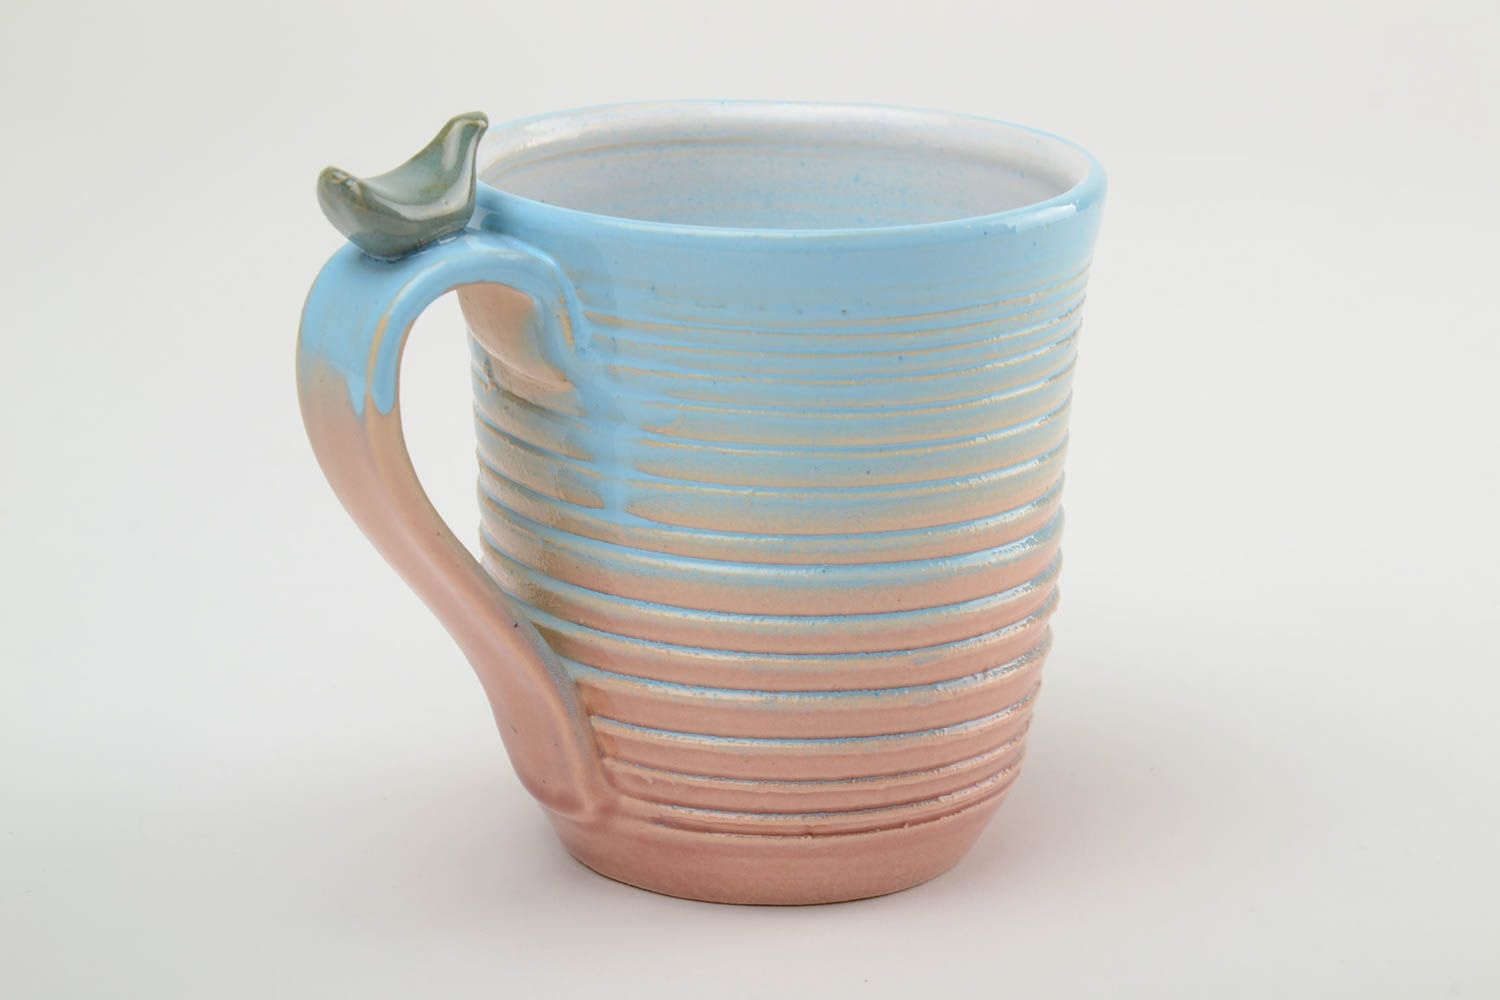 10 oz porcelain handmade drinking cup in blue, white, and beige colors with handle photo 3